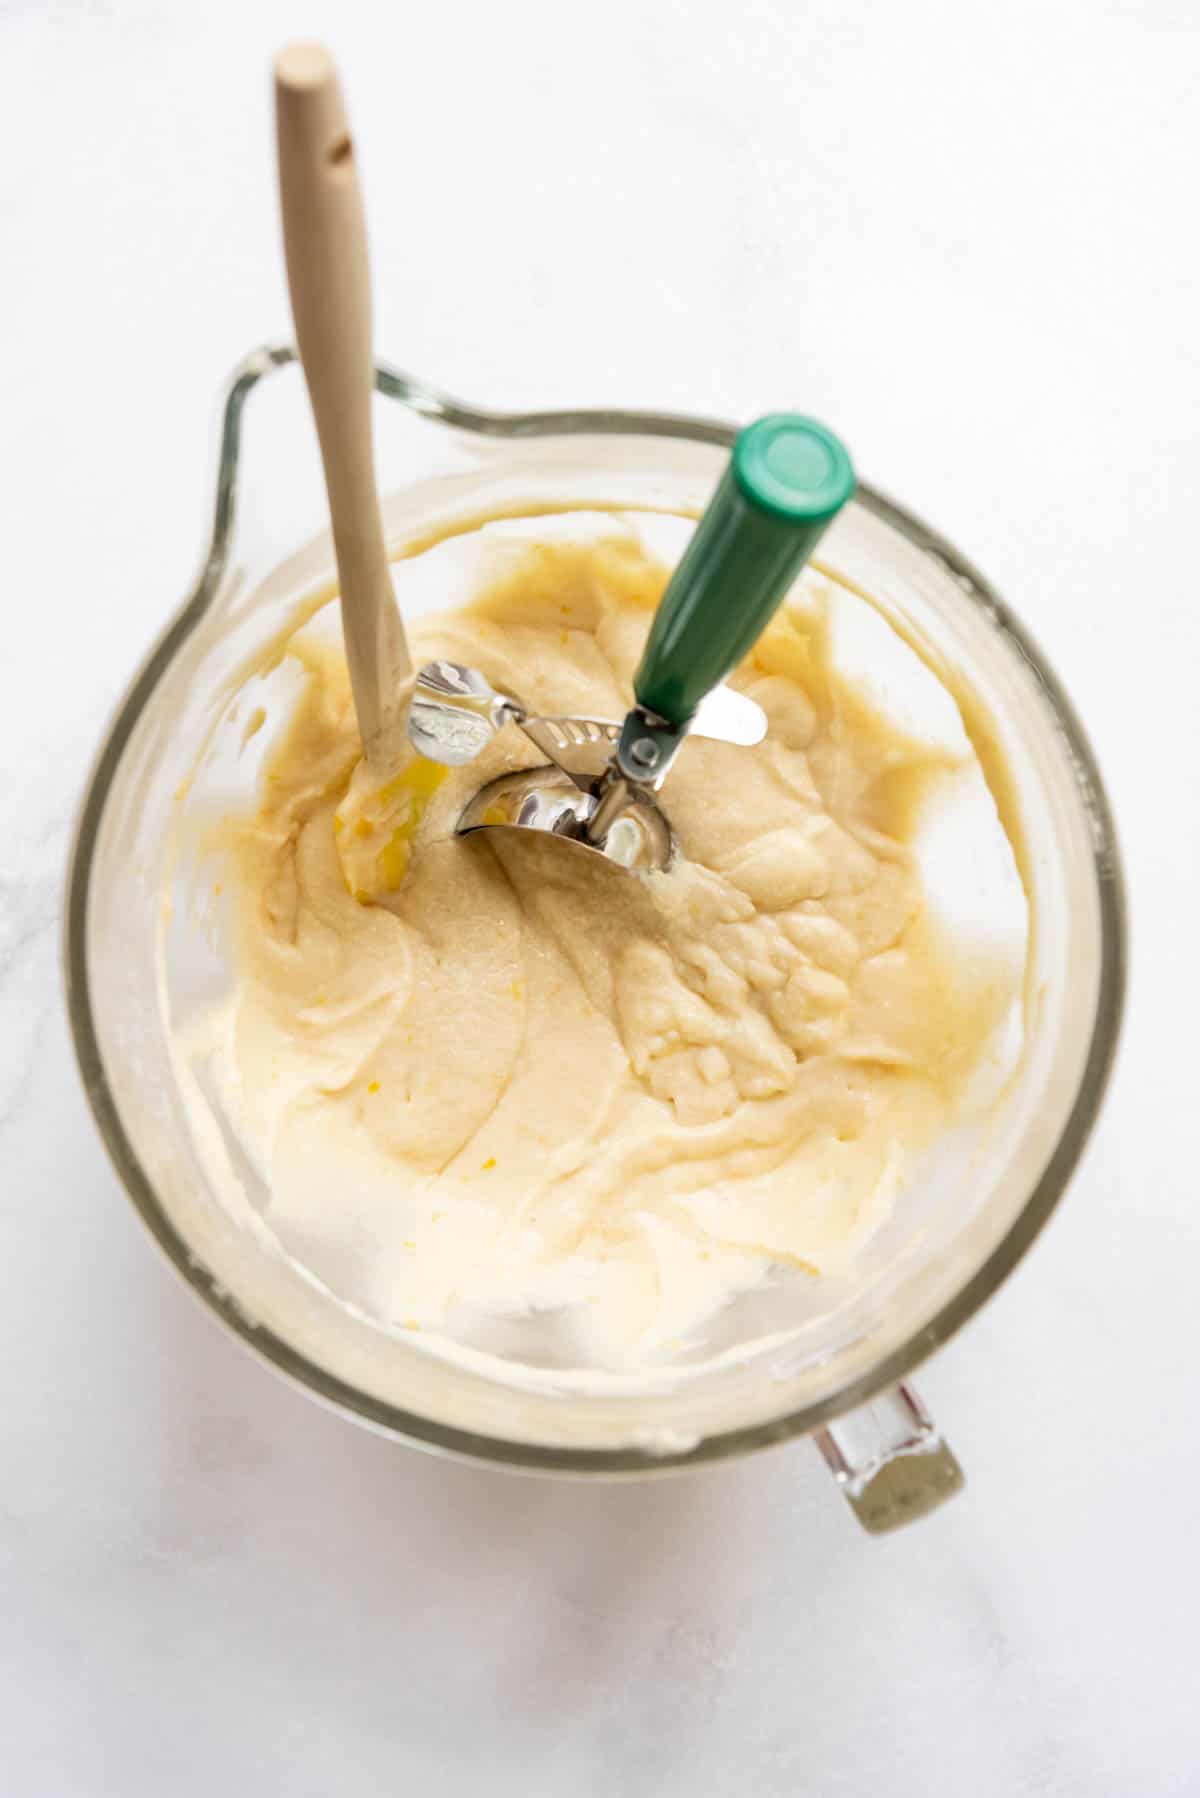 Top view of a glass mixing jug with lemon cupcake batter, a wooden spoon, and a scoop in it.